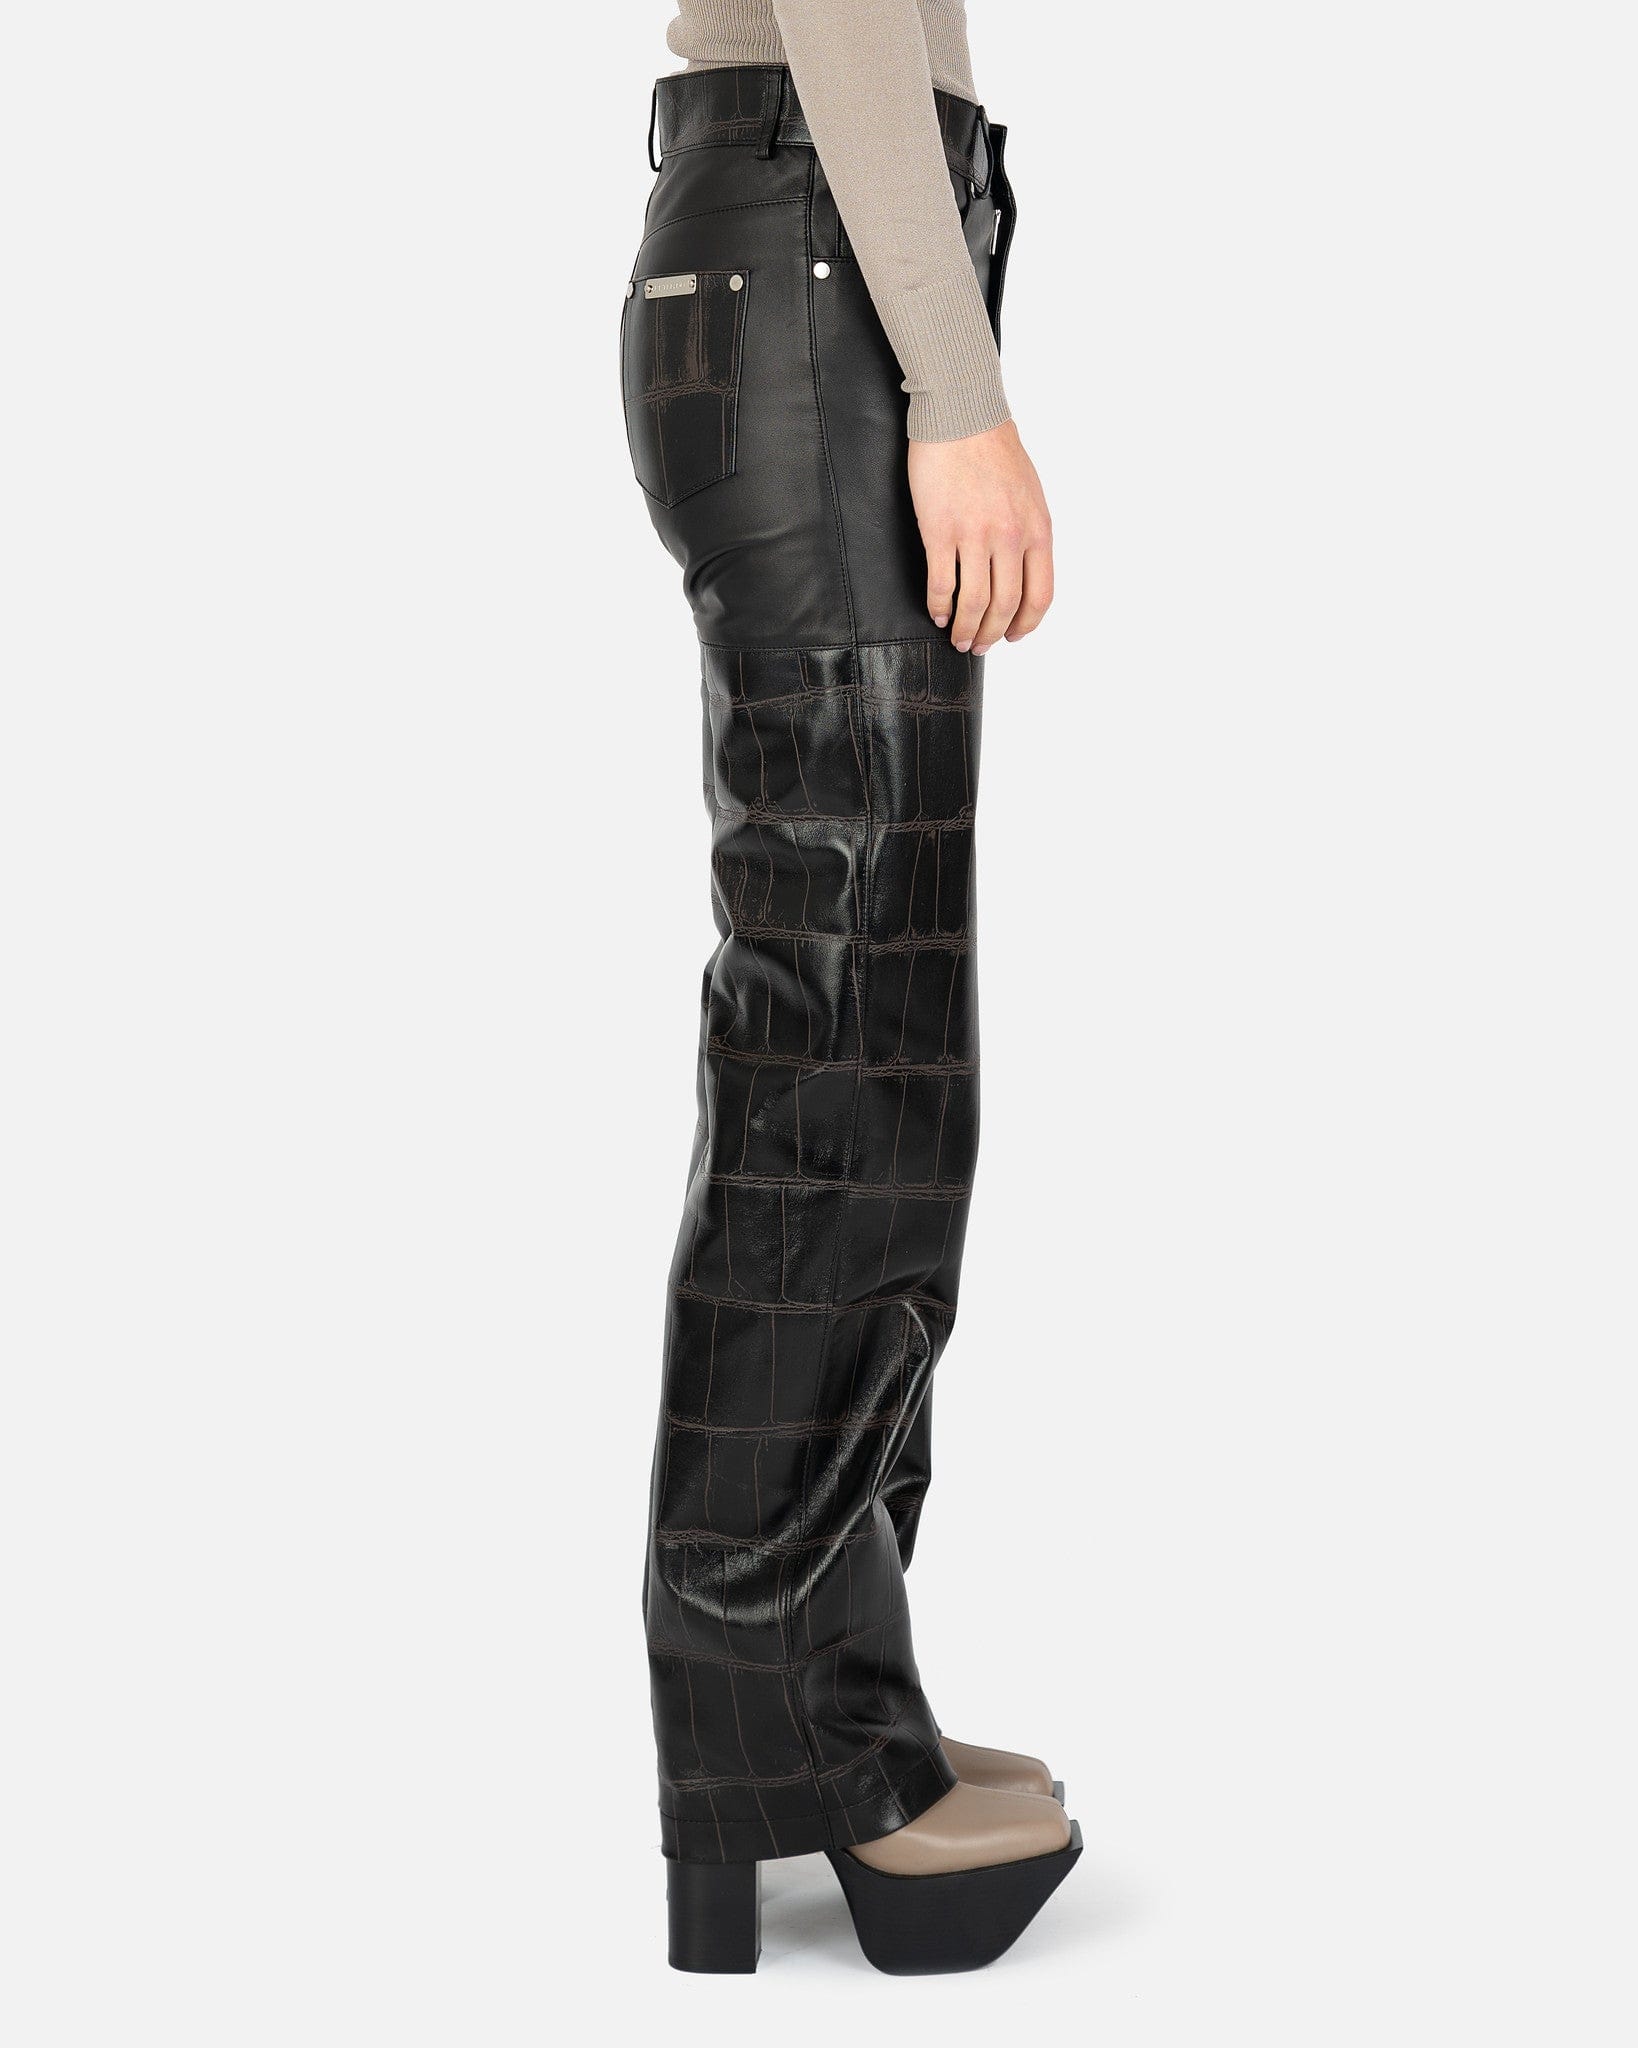 Combo Leather Pant in Black/Brown